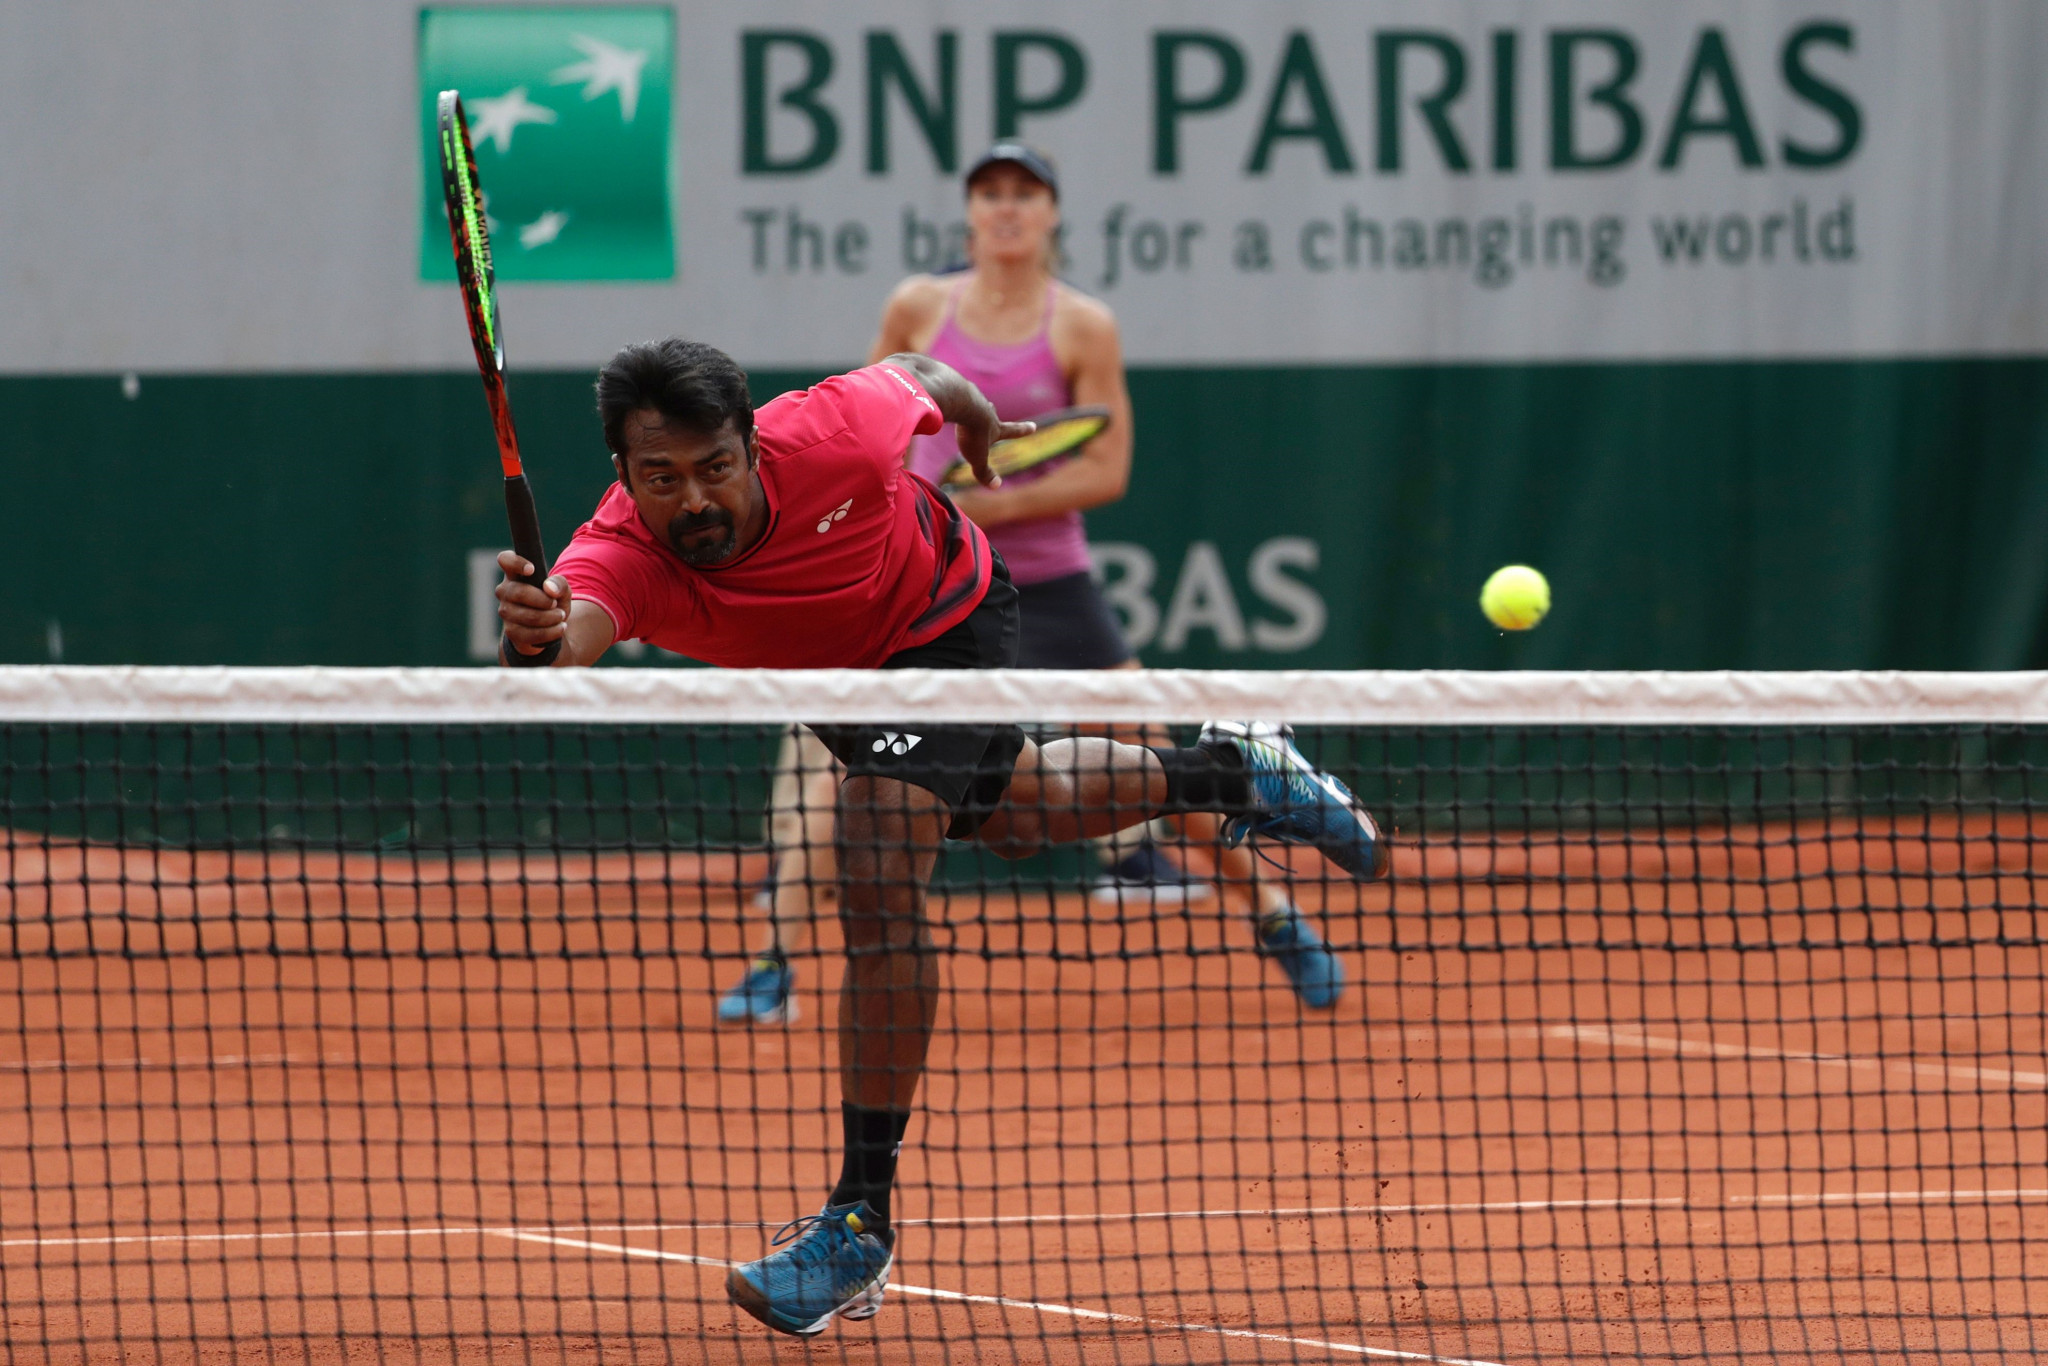 Indian tennis player Leander Paes has withdrawn from the 2018 Asian Games after his repeated requests for a "specialist" men’s doubles partner were not met ©Getty Images